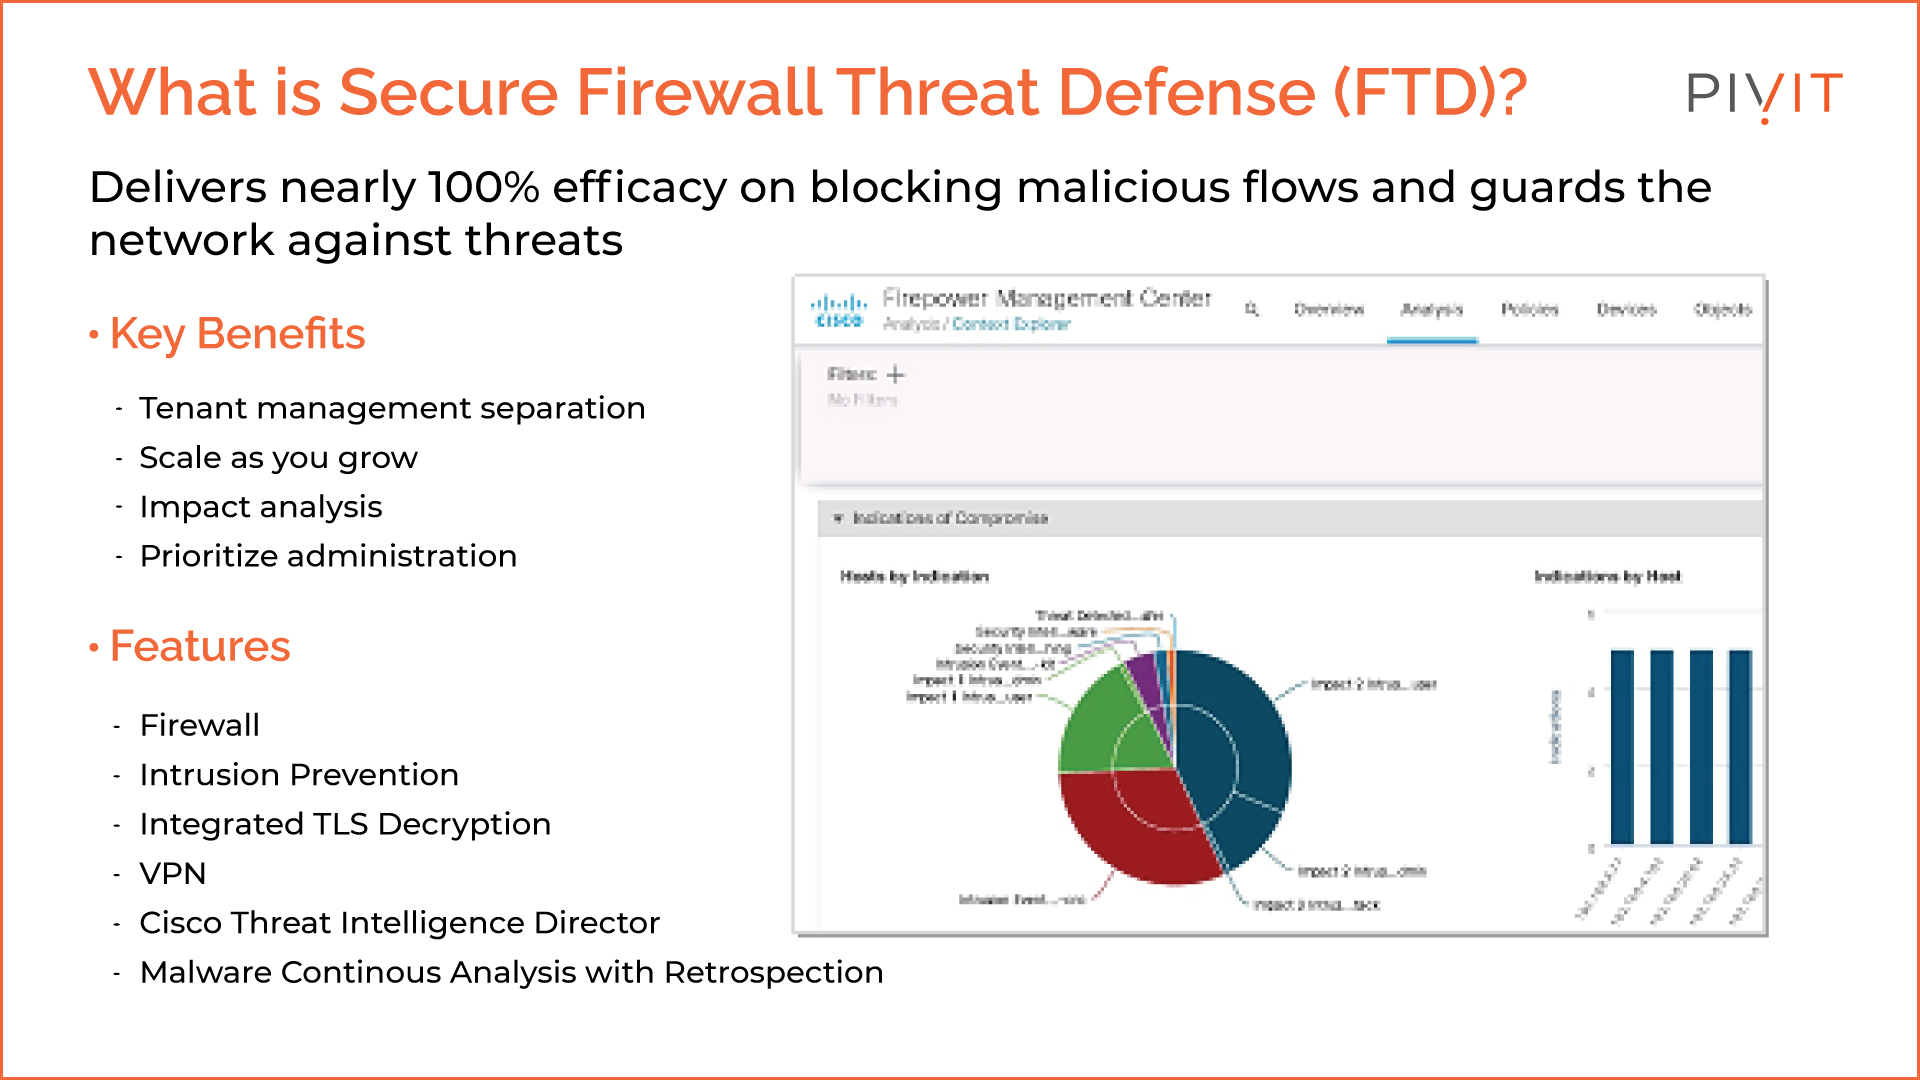 Answering the question of what secure firewall threat defense is and its key benefits